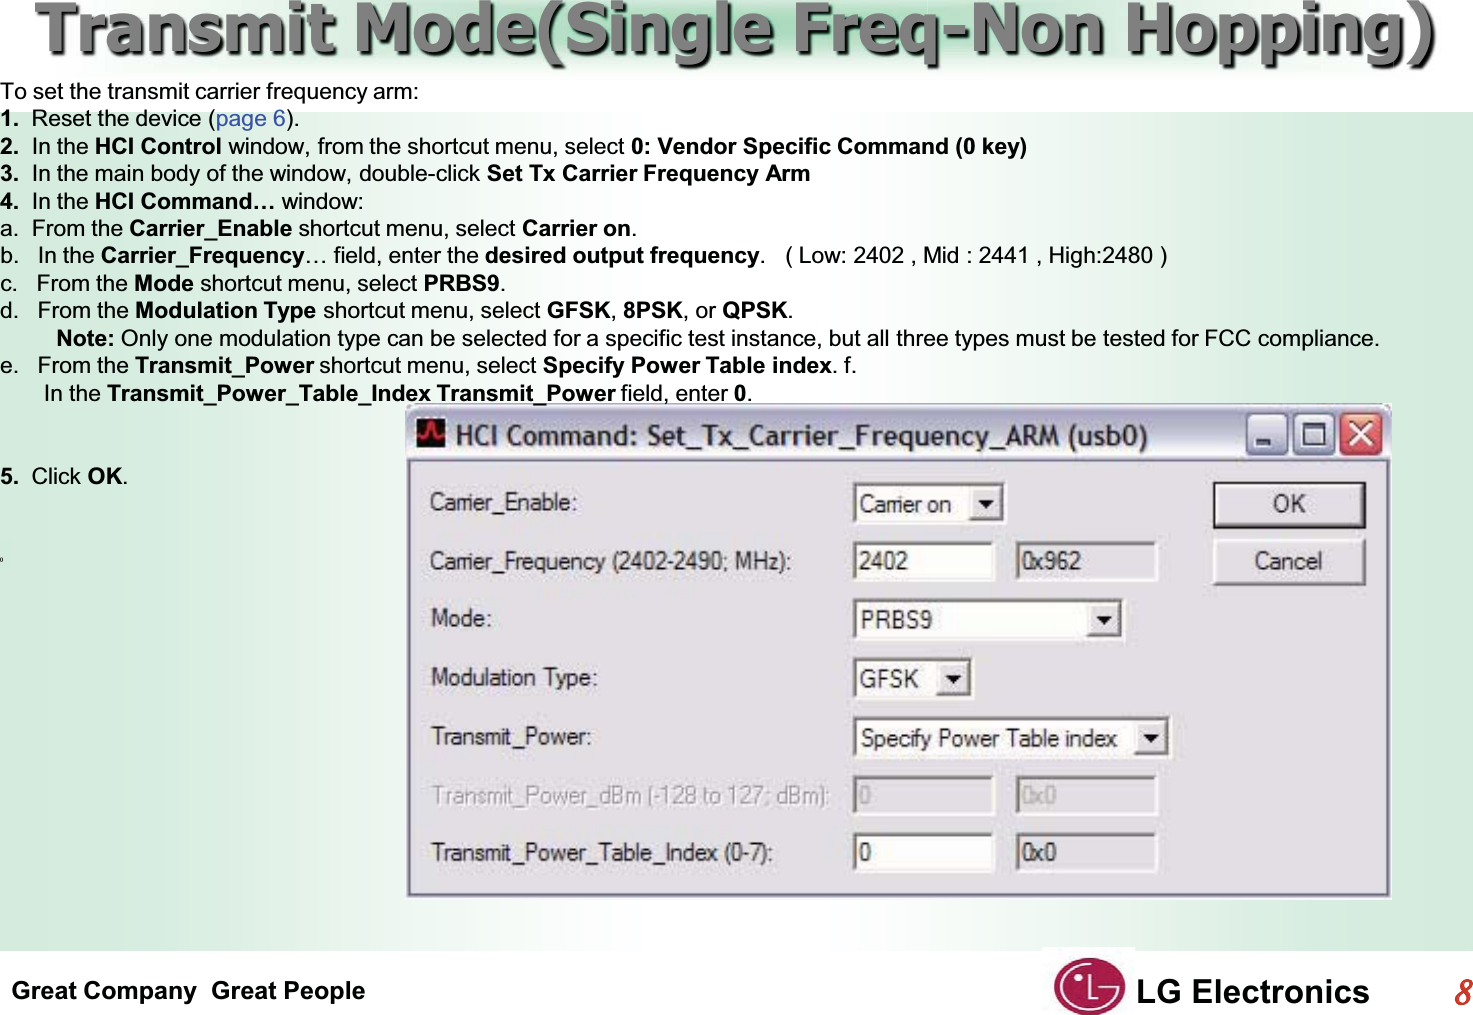 Great Company  Great People LG Electronics88  Transmit Mode(Single Freq-Non Hopping)GTo set the transmit carrier frequency arm:G1.  Reset the device (page 6).G2.  In the HCI Control window, from the shortcut menu, select 0: Vendor Specific Command (0 key)G3.  In the main body of the window, double-click Set Tx Carrier Frequency ArmG4.  In the HCI Command… window:Ga.  From the Carrier_Enable shortcut menu, select Carrier on.Gb. In the Carrier_Frequency… field, enter the desired output frequency.   ( Low: 2402 , Mid : 2441 , High:2480 )c.   From the Mode shortcut menu, select PRBS9.Gd. From the Modulation Type shortcut menu, select GFSK,8PSK, or QPSK.         Note: Only one modulation type can be selected for a specific test instance, but all three types must be tested for FCC compliance.e. From the Transmit_Power shortcut menu, select Specify Power Table index. f.          In the Transmit_Power_Table_Index Transmit_Power field, enter 0.GGG5.  Click OK.GGGG()GG